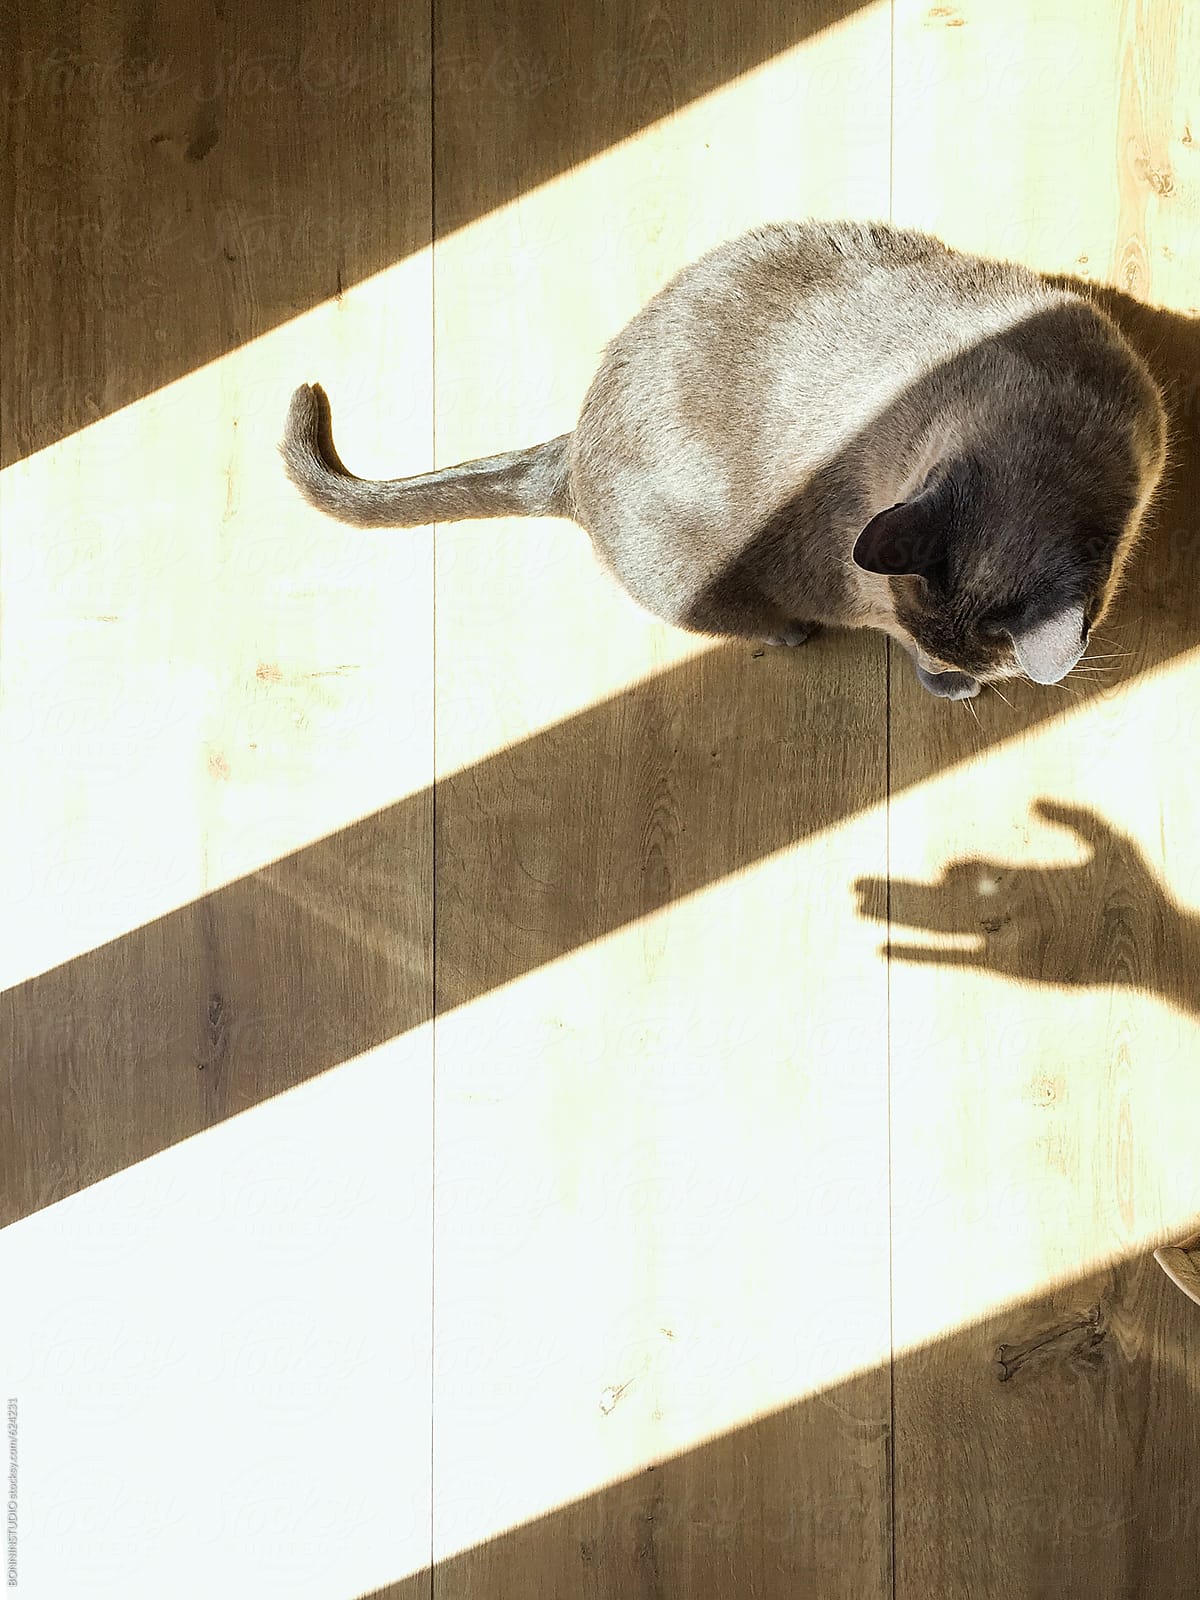 Overhead of a cat looking at a hand making a shadow figure of a dog.